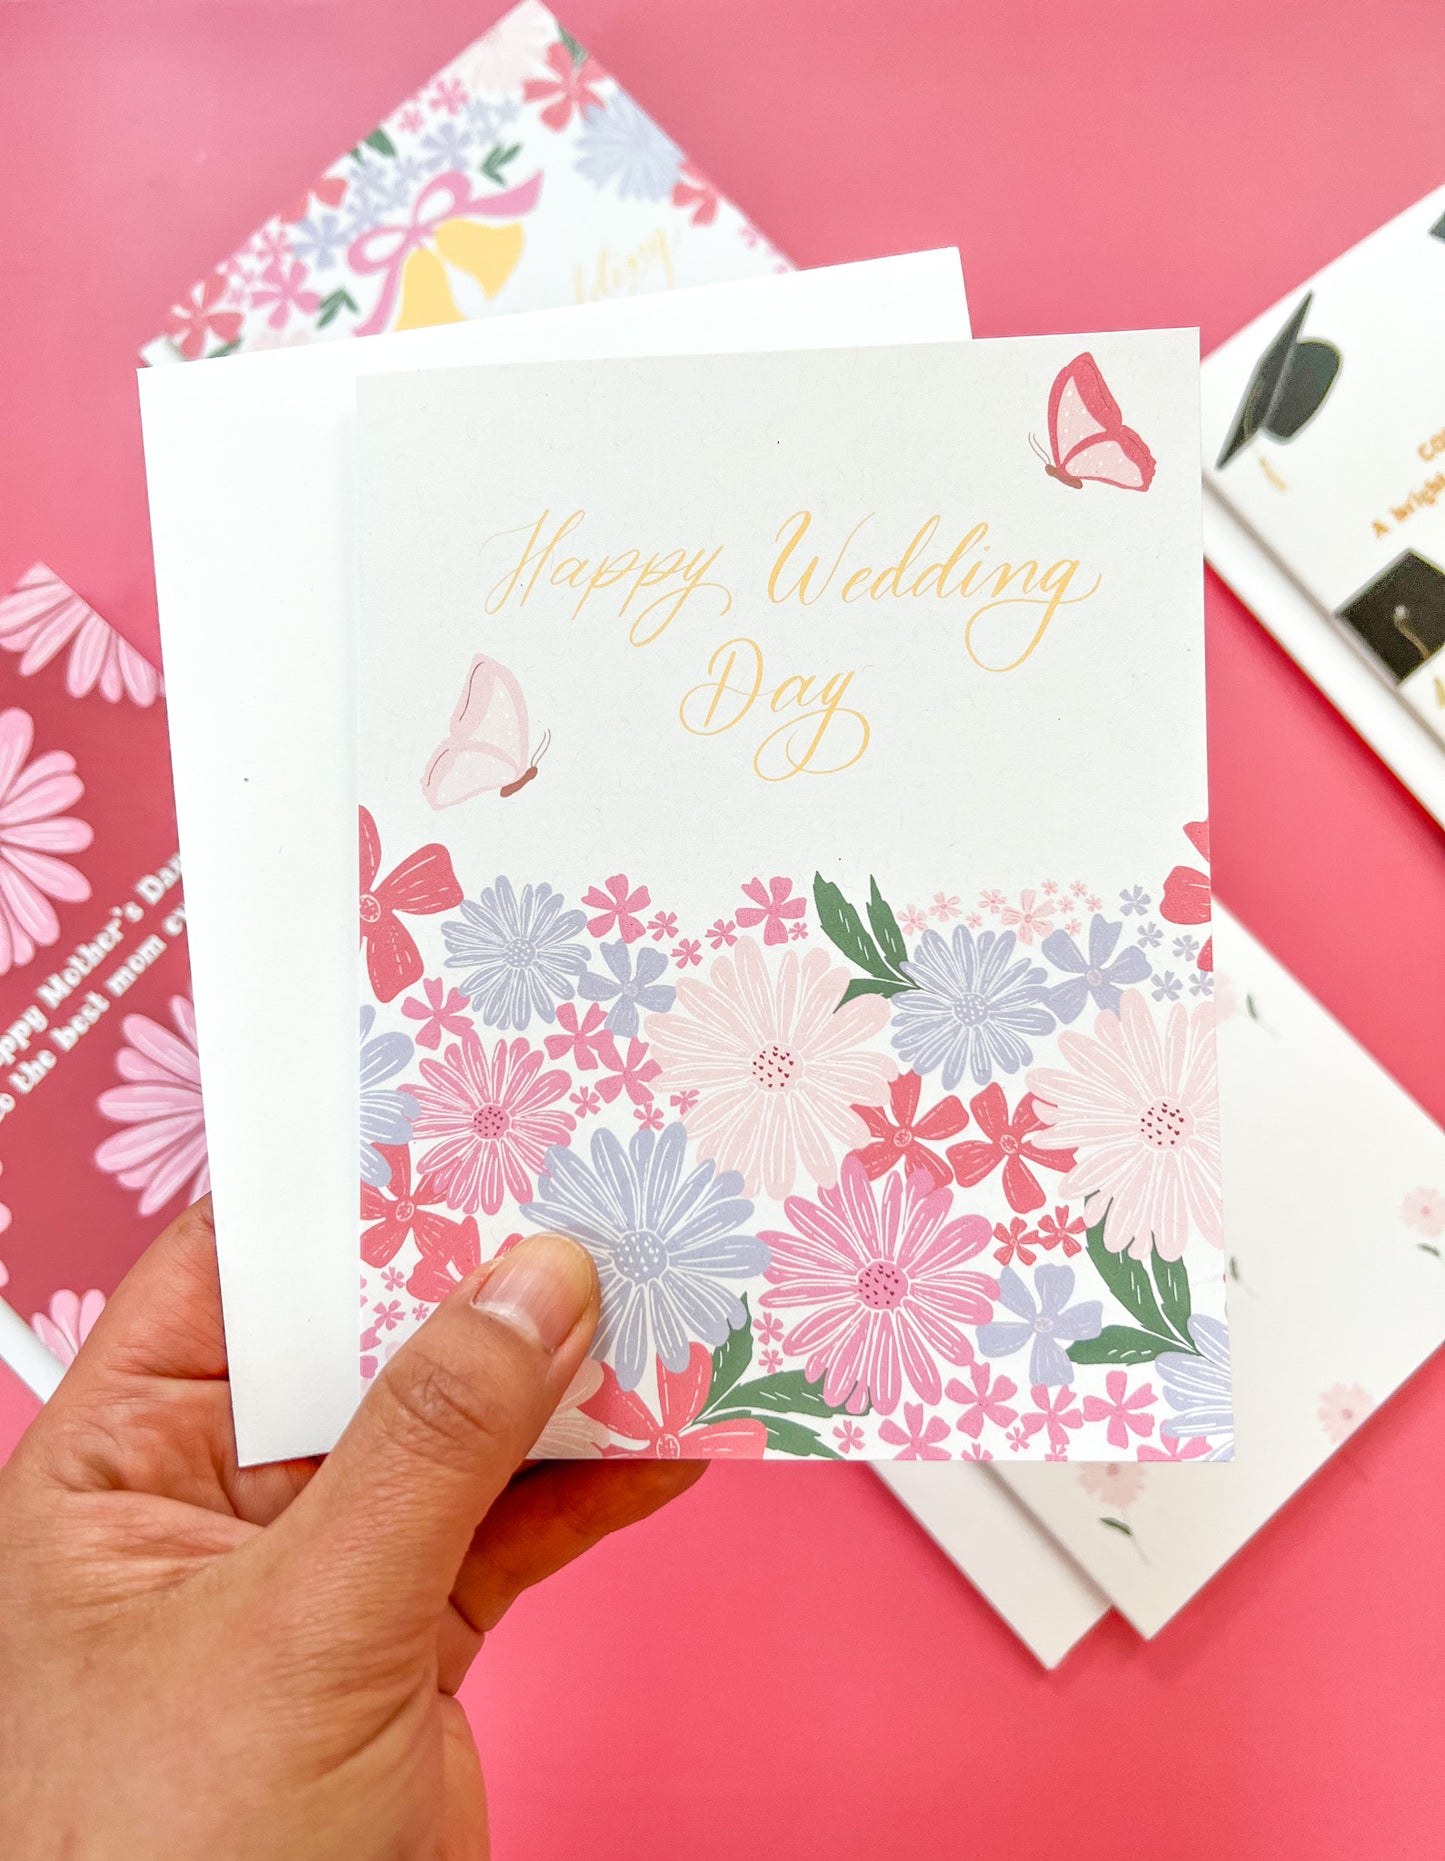 adorable wedding card with pink flowers and butterflies